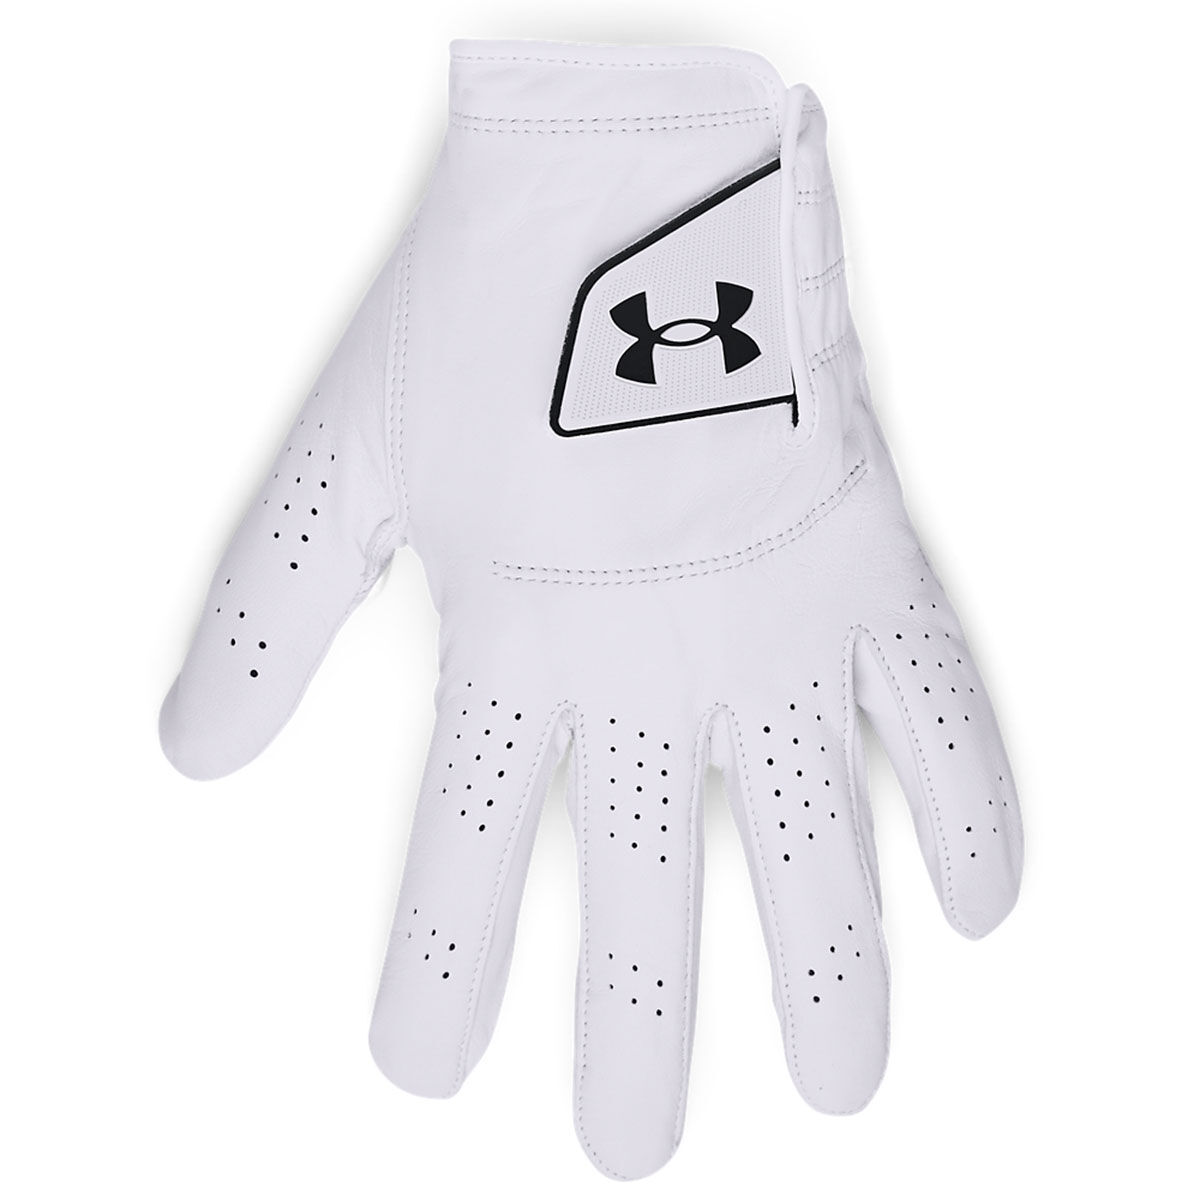 Under Armour Men’s White and Black Comfortable Left Hand Spieth Tour Golf Glove, Size: Small | American Golf